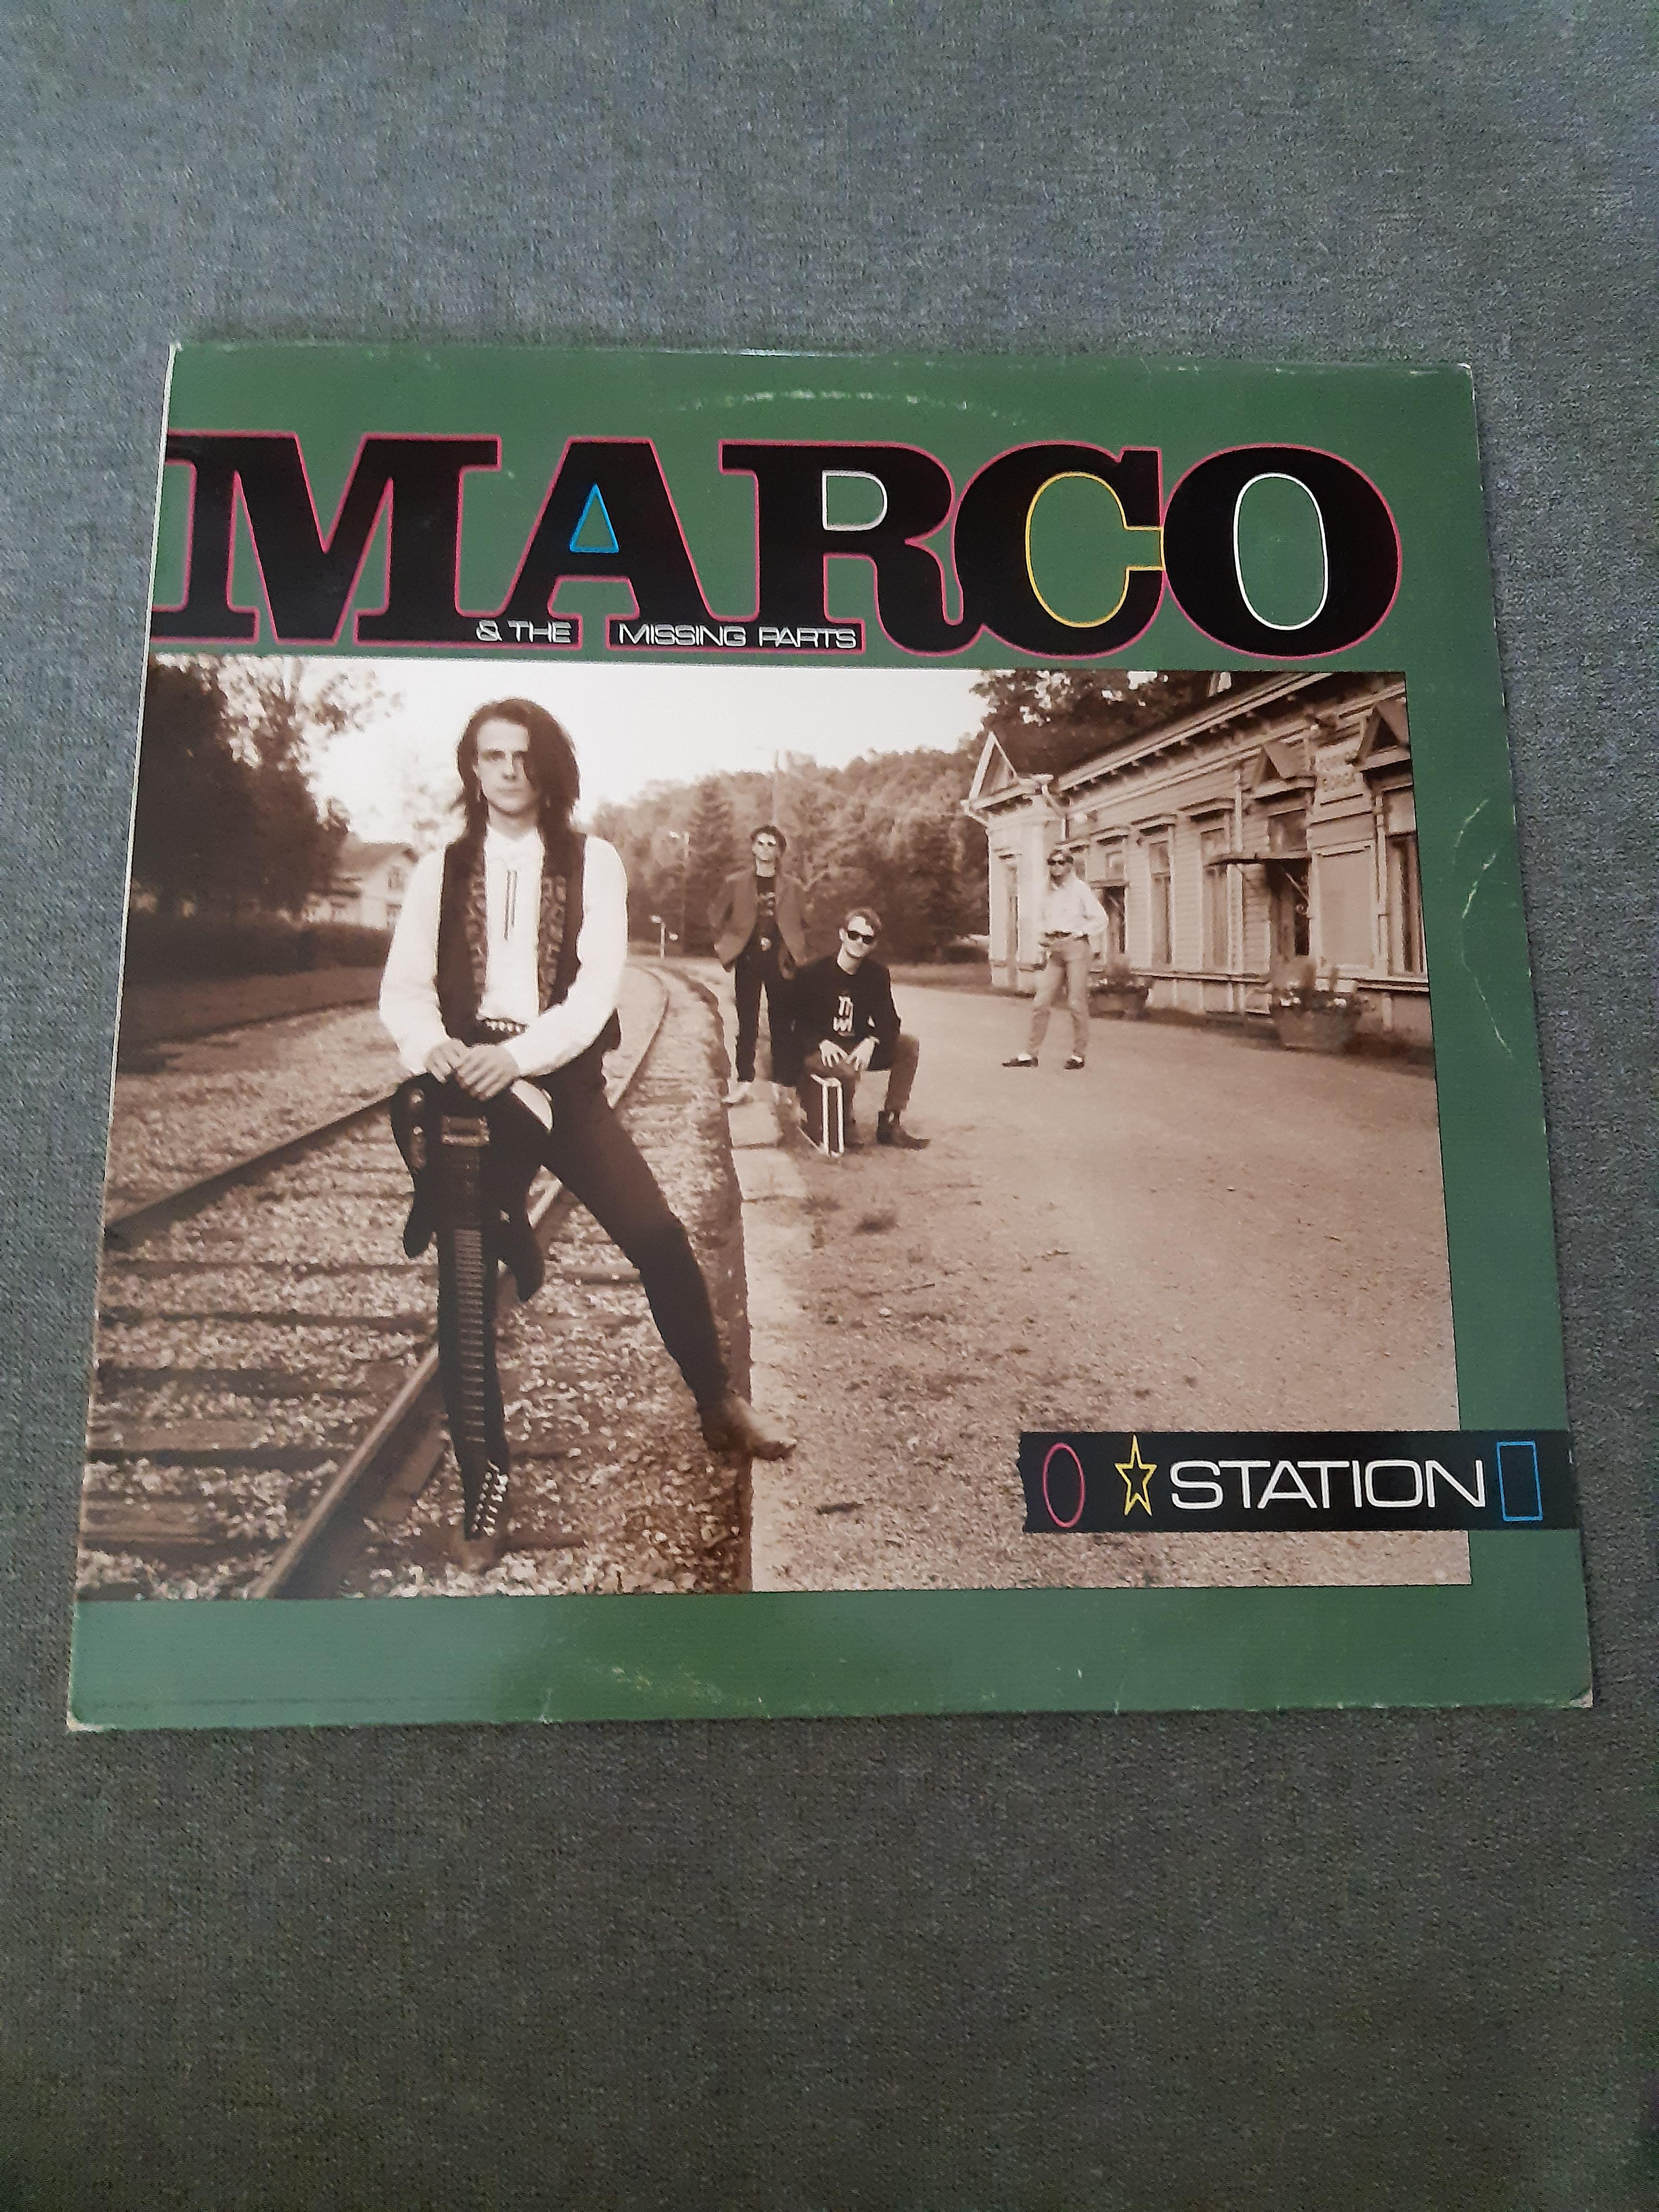 Marco & The Missing Parts - Station - LP (käytetty)